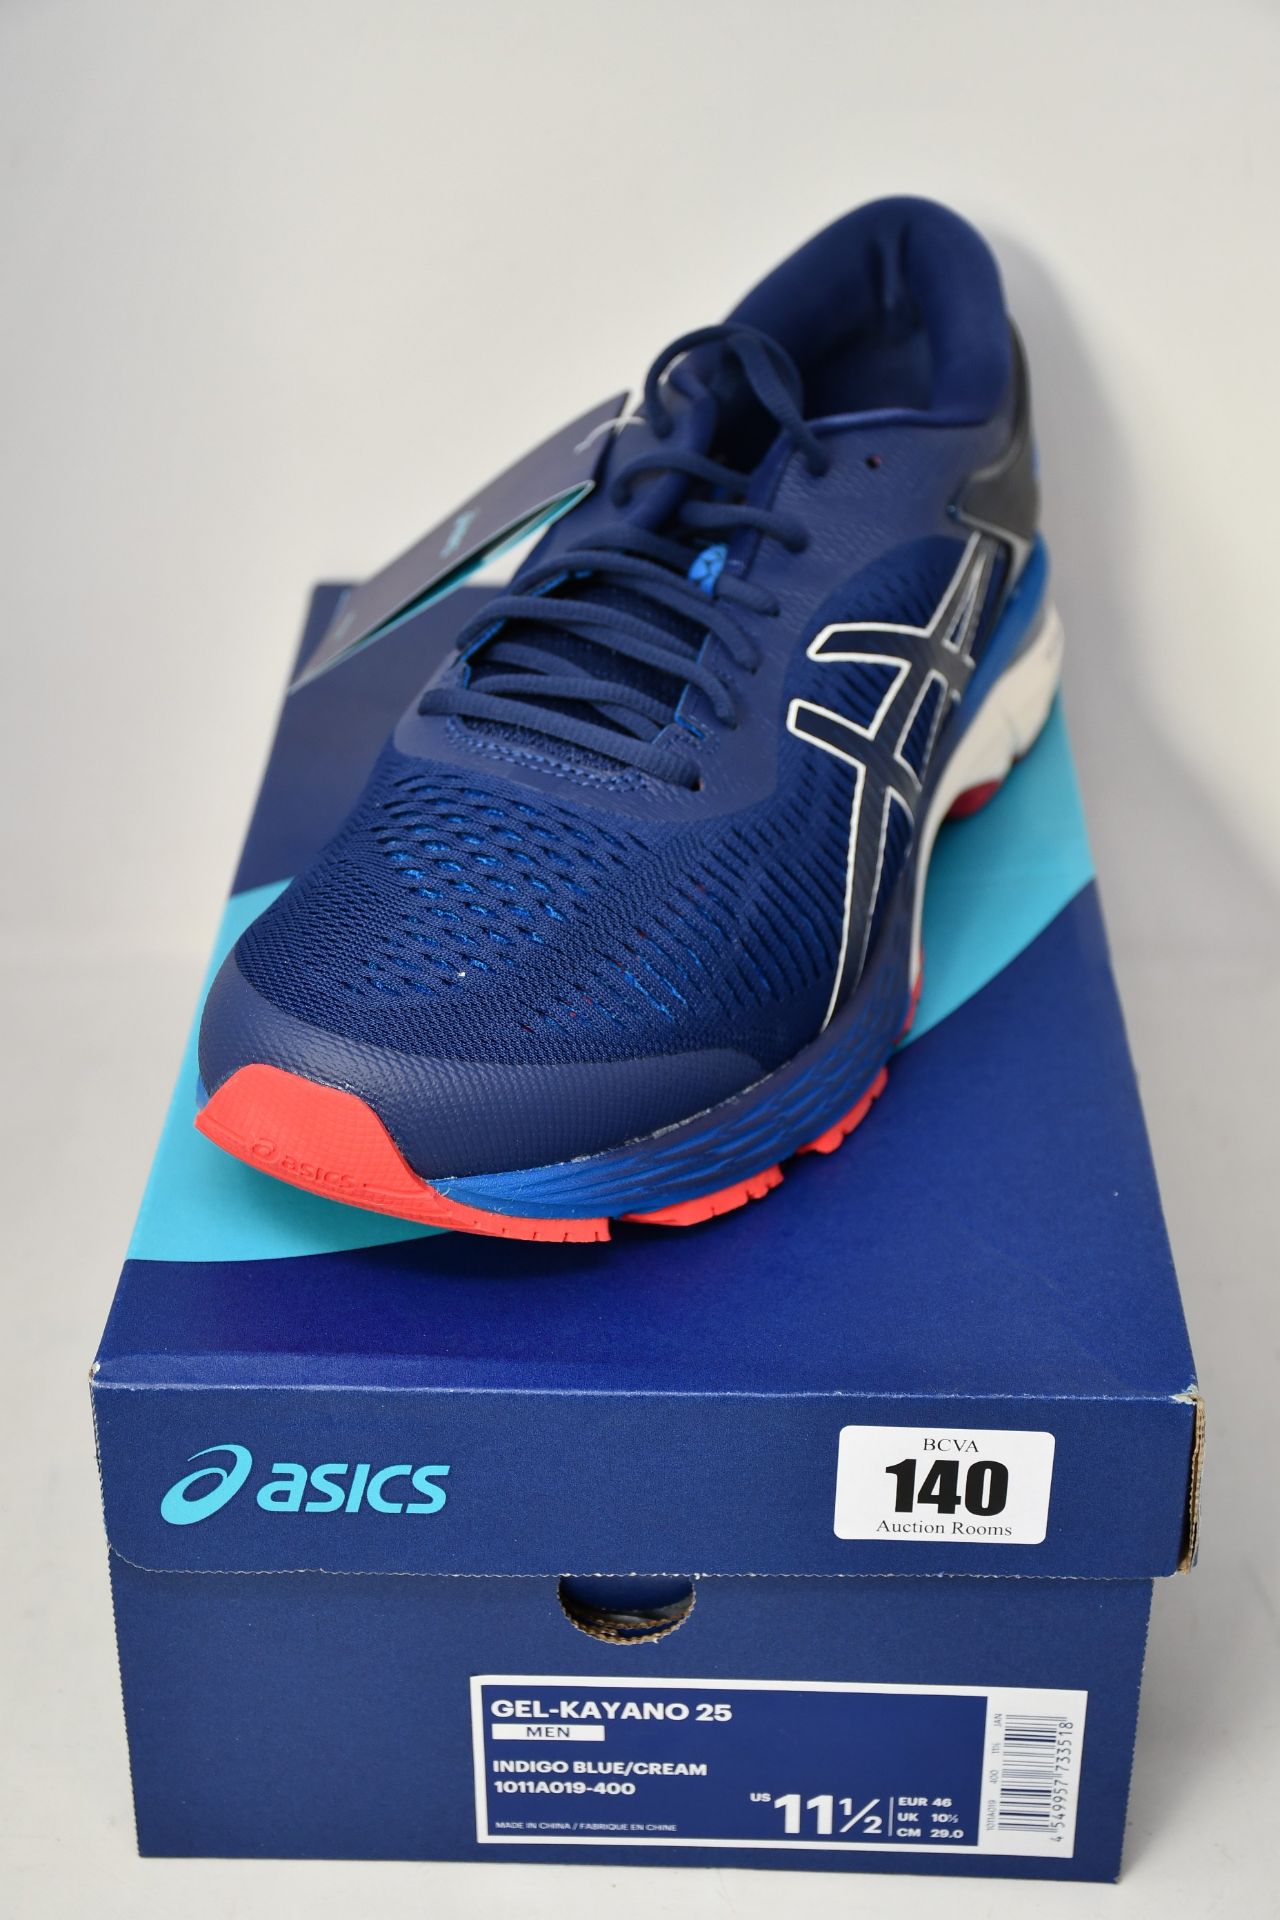 A pair of as new Asics Gel-Kayano 25 trainers (UK 10.5).